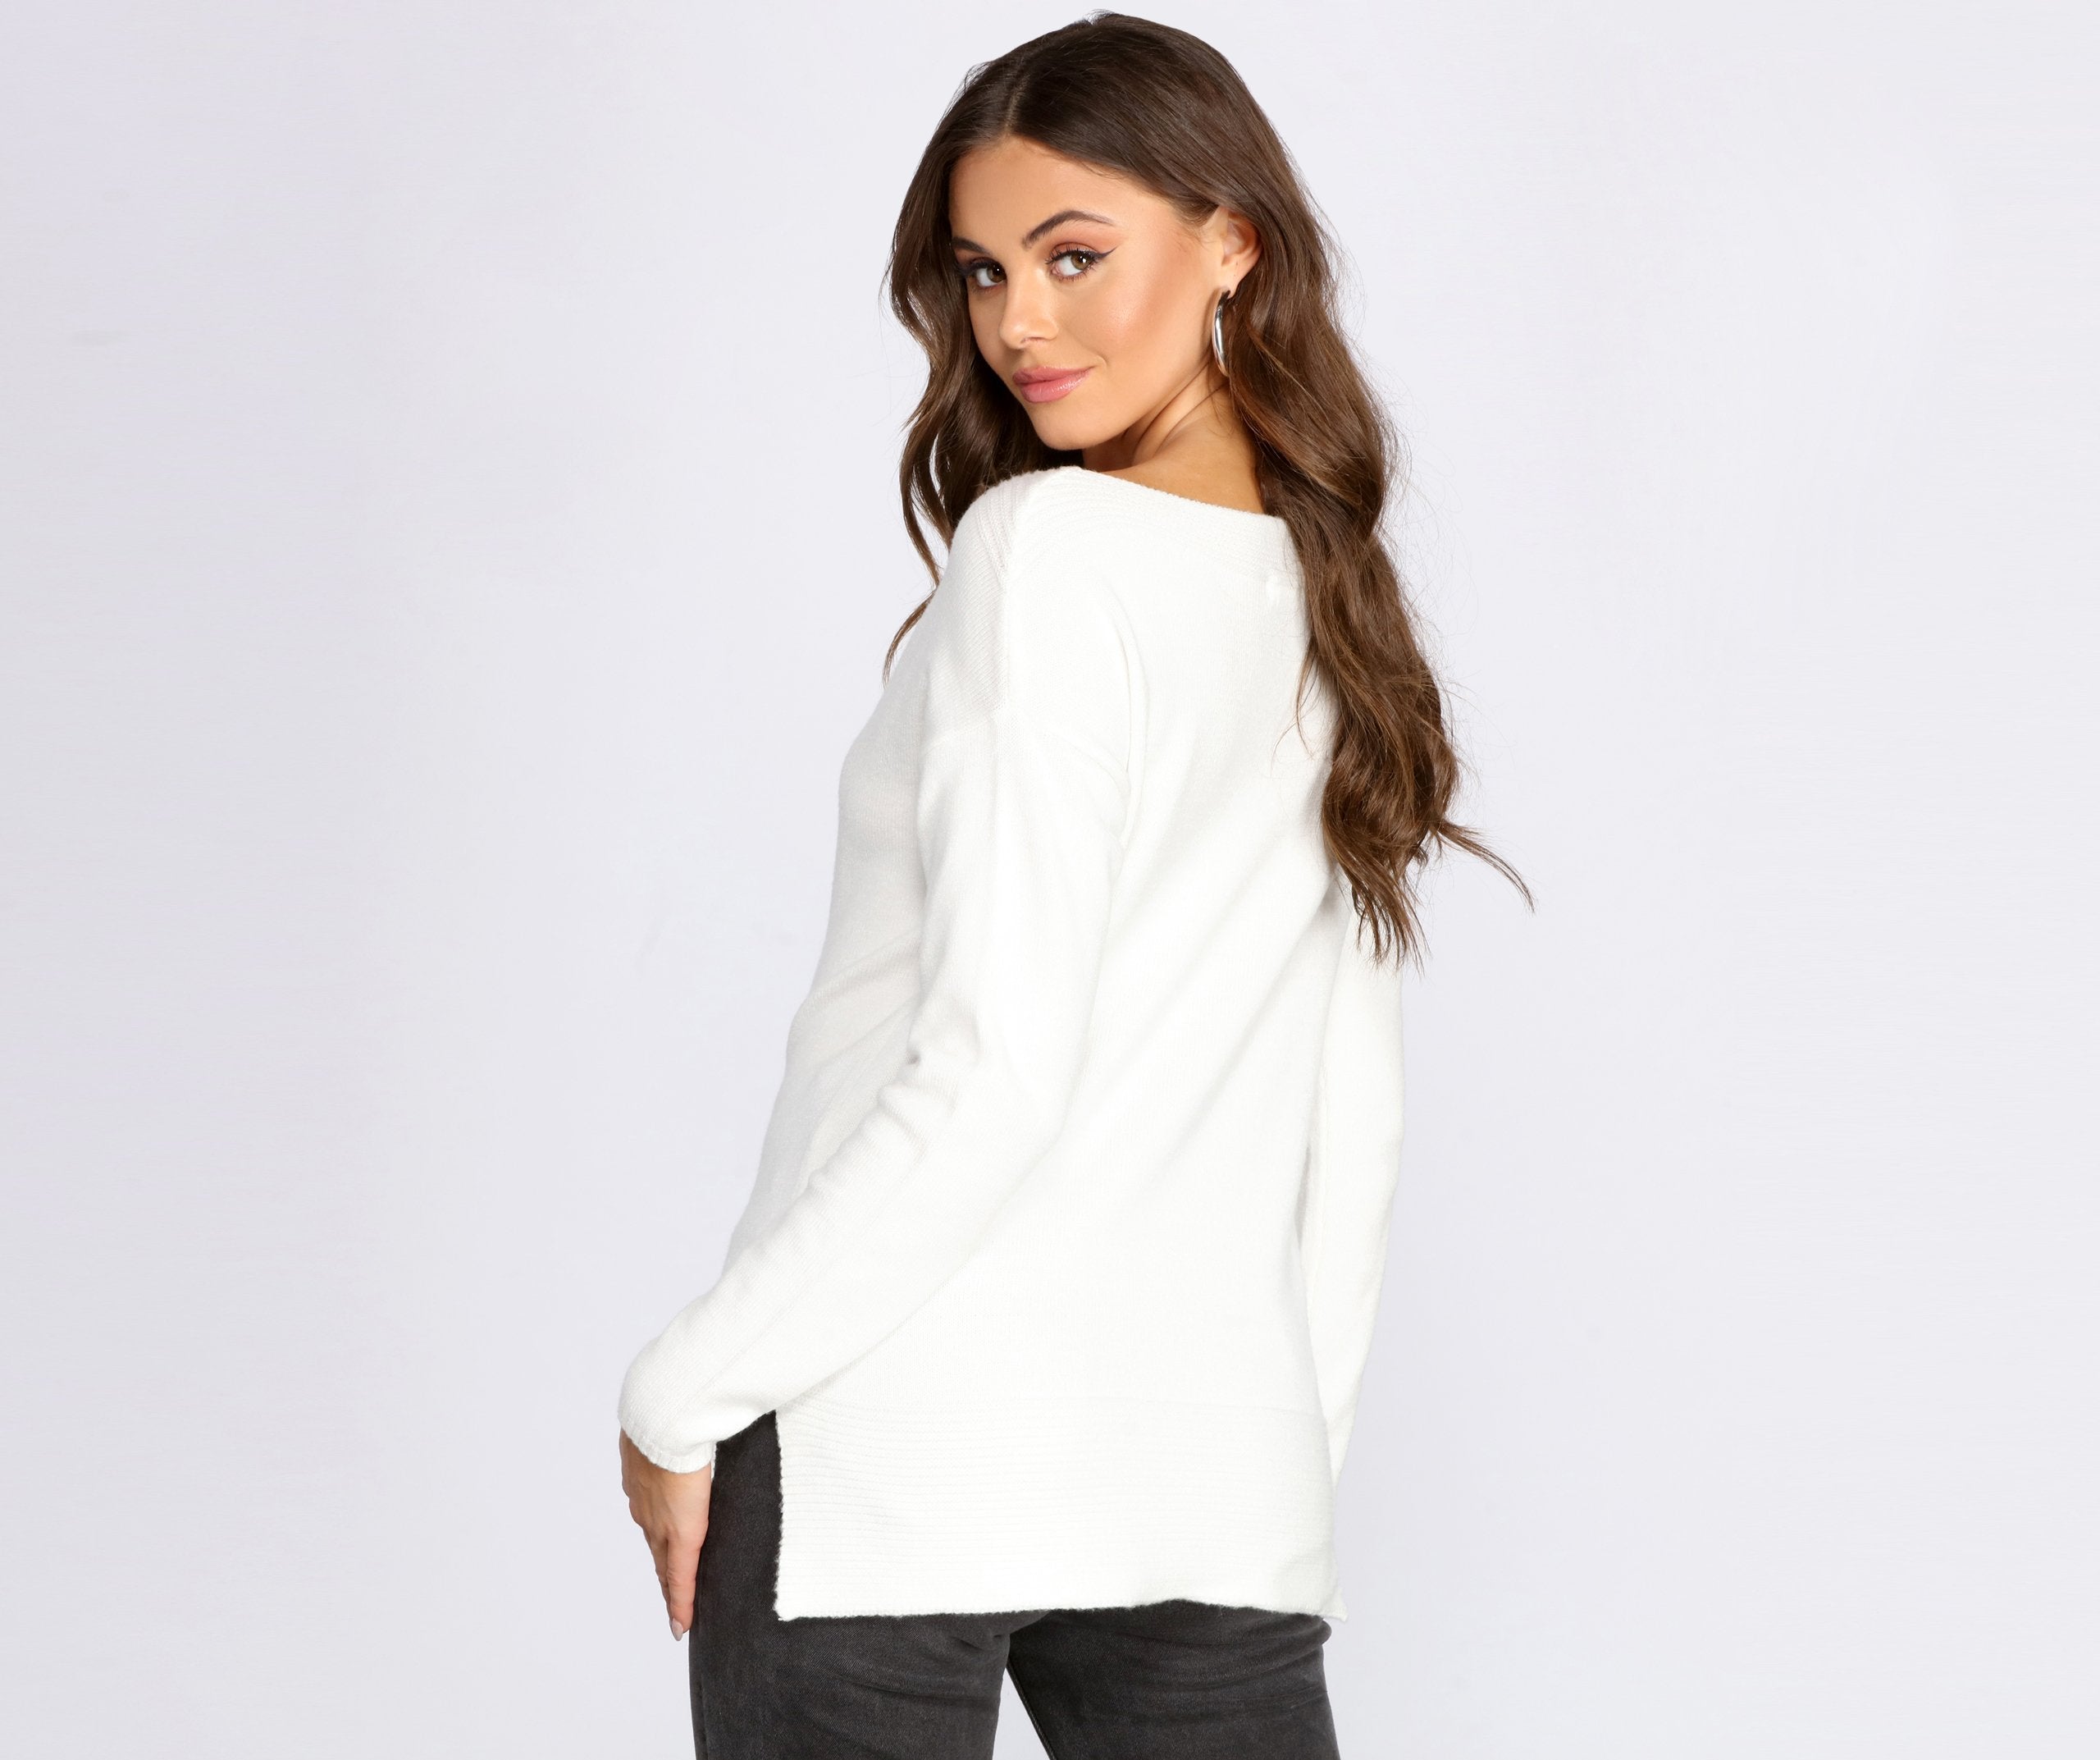 Classic Chic Dolman Sleeve Sweater - Lady Occasions